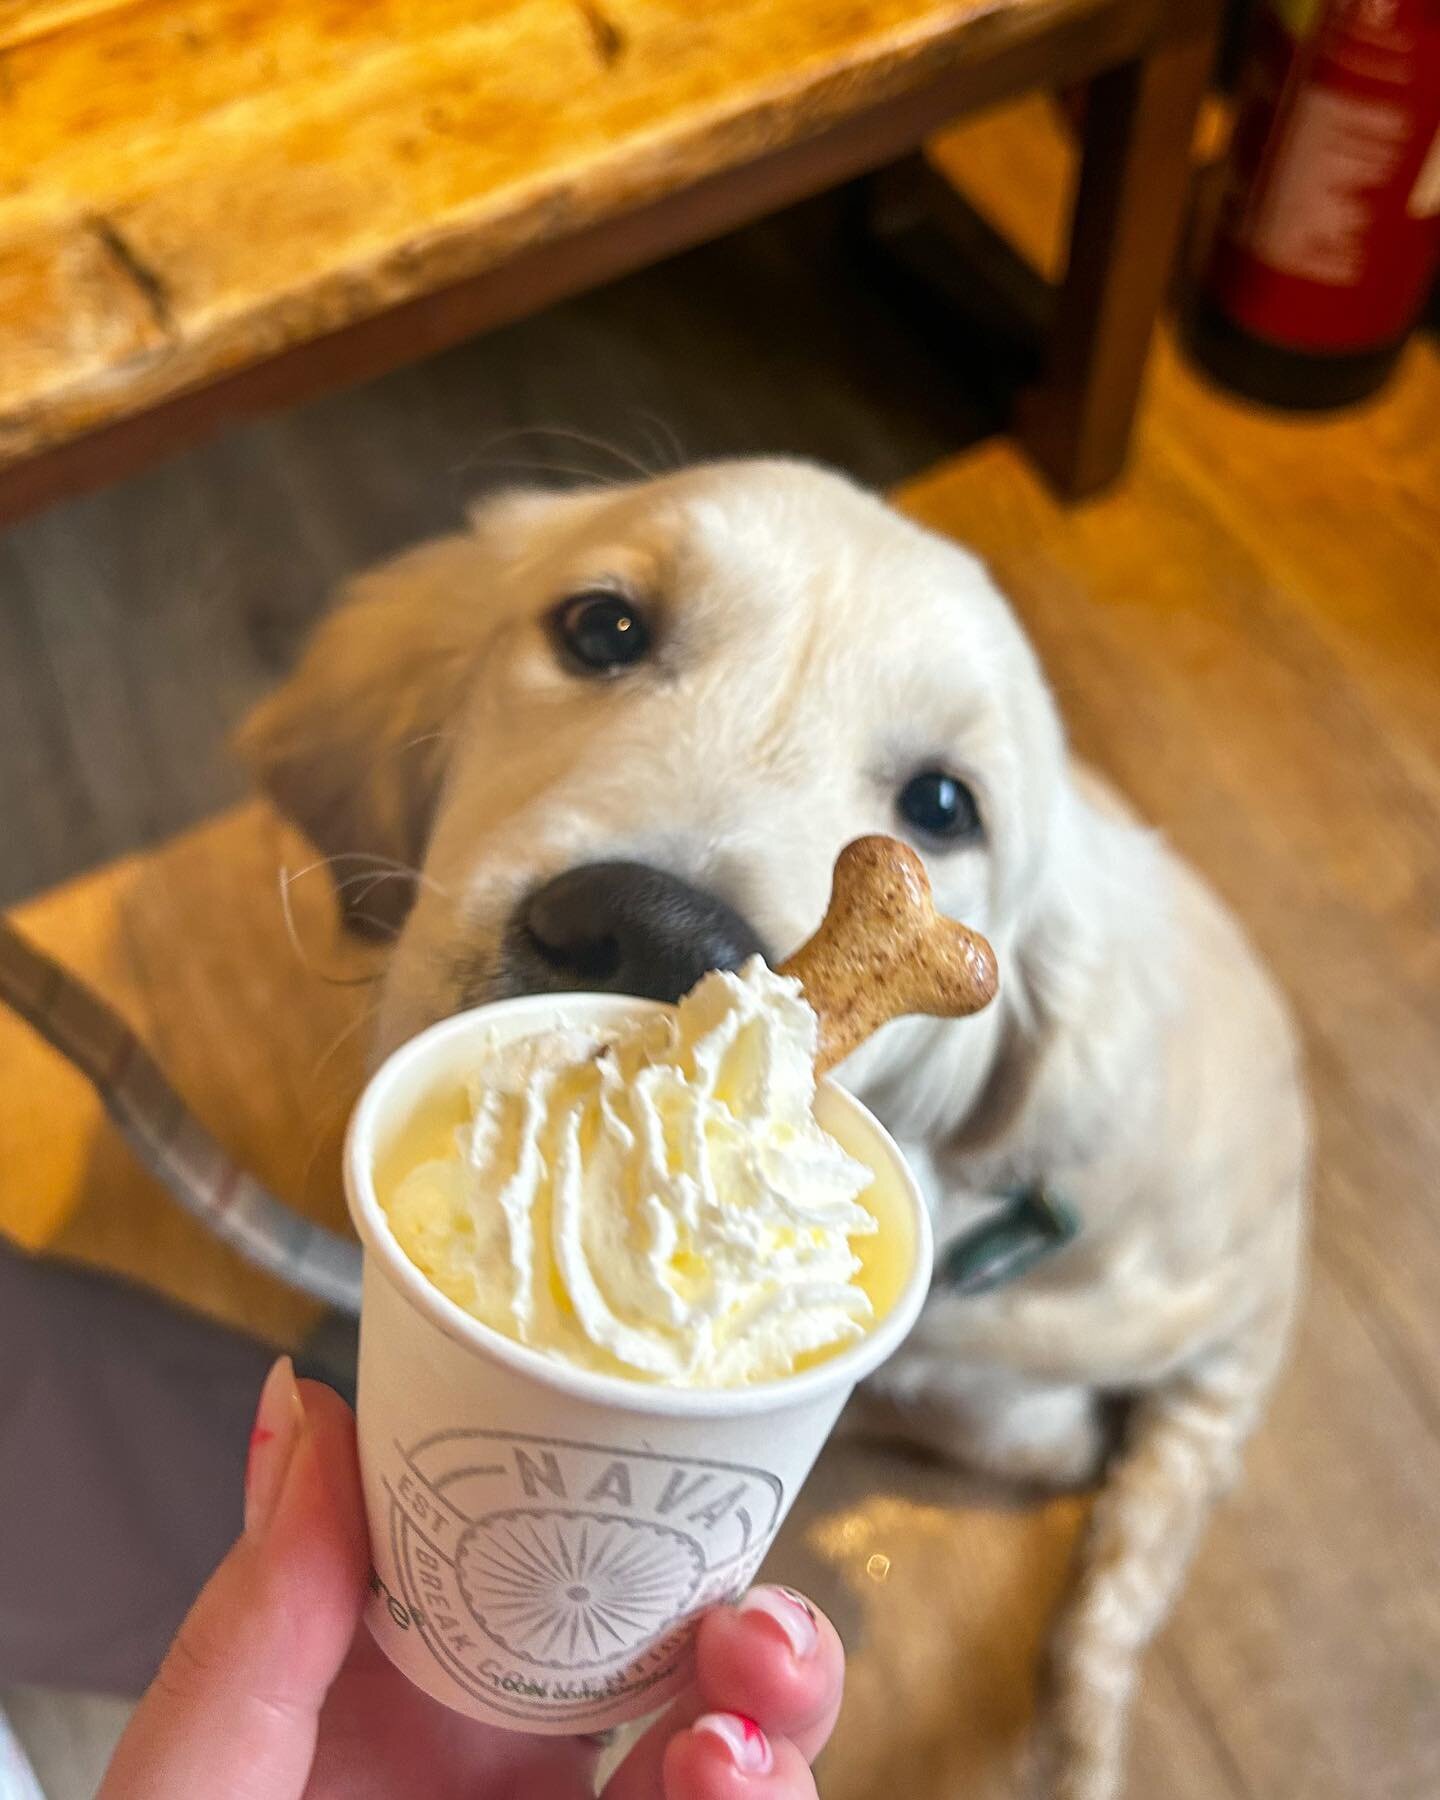 Puppy of the week 🐶 Mr Freddy enjoying his puppercino 🍦

Treat your puppy today 🫶🐩🐾